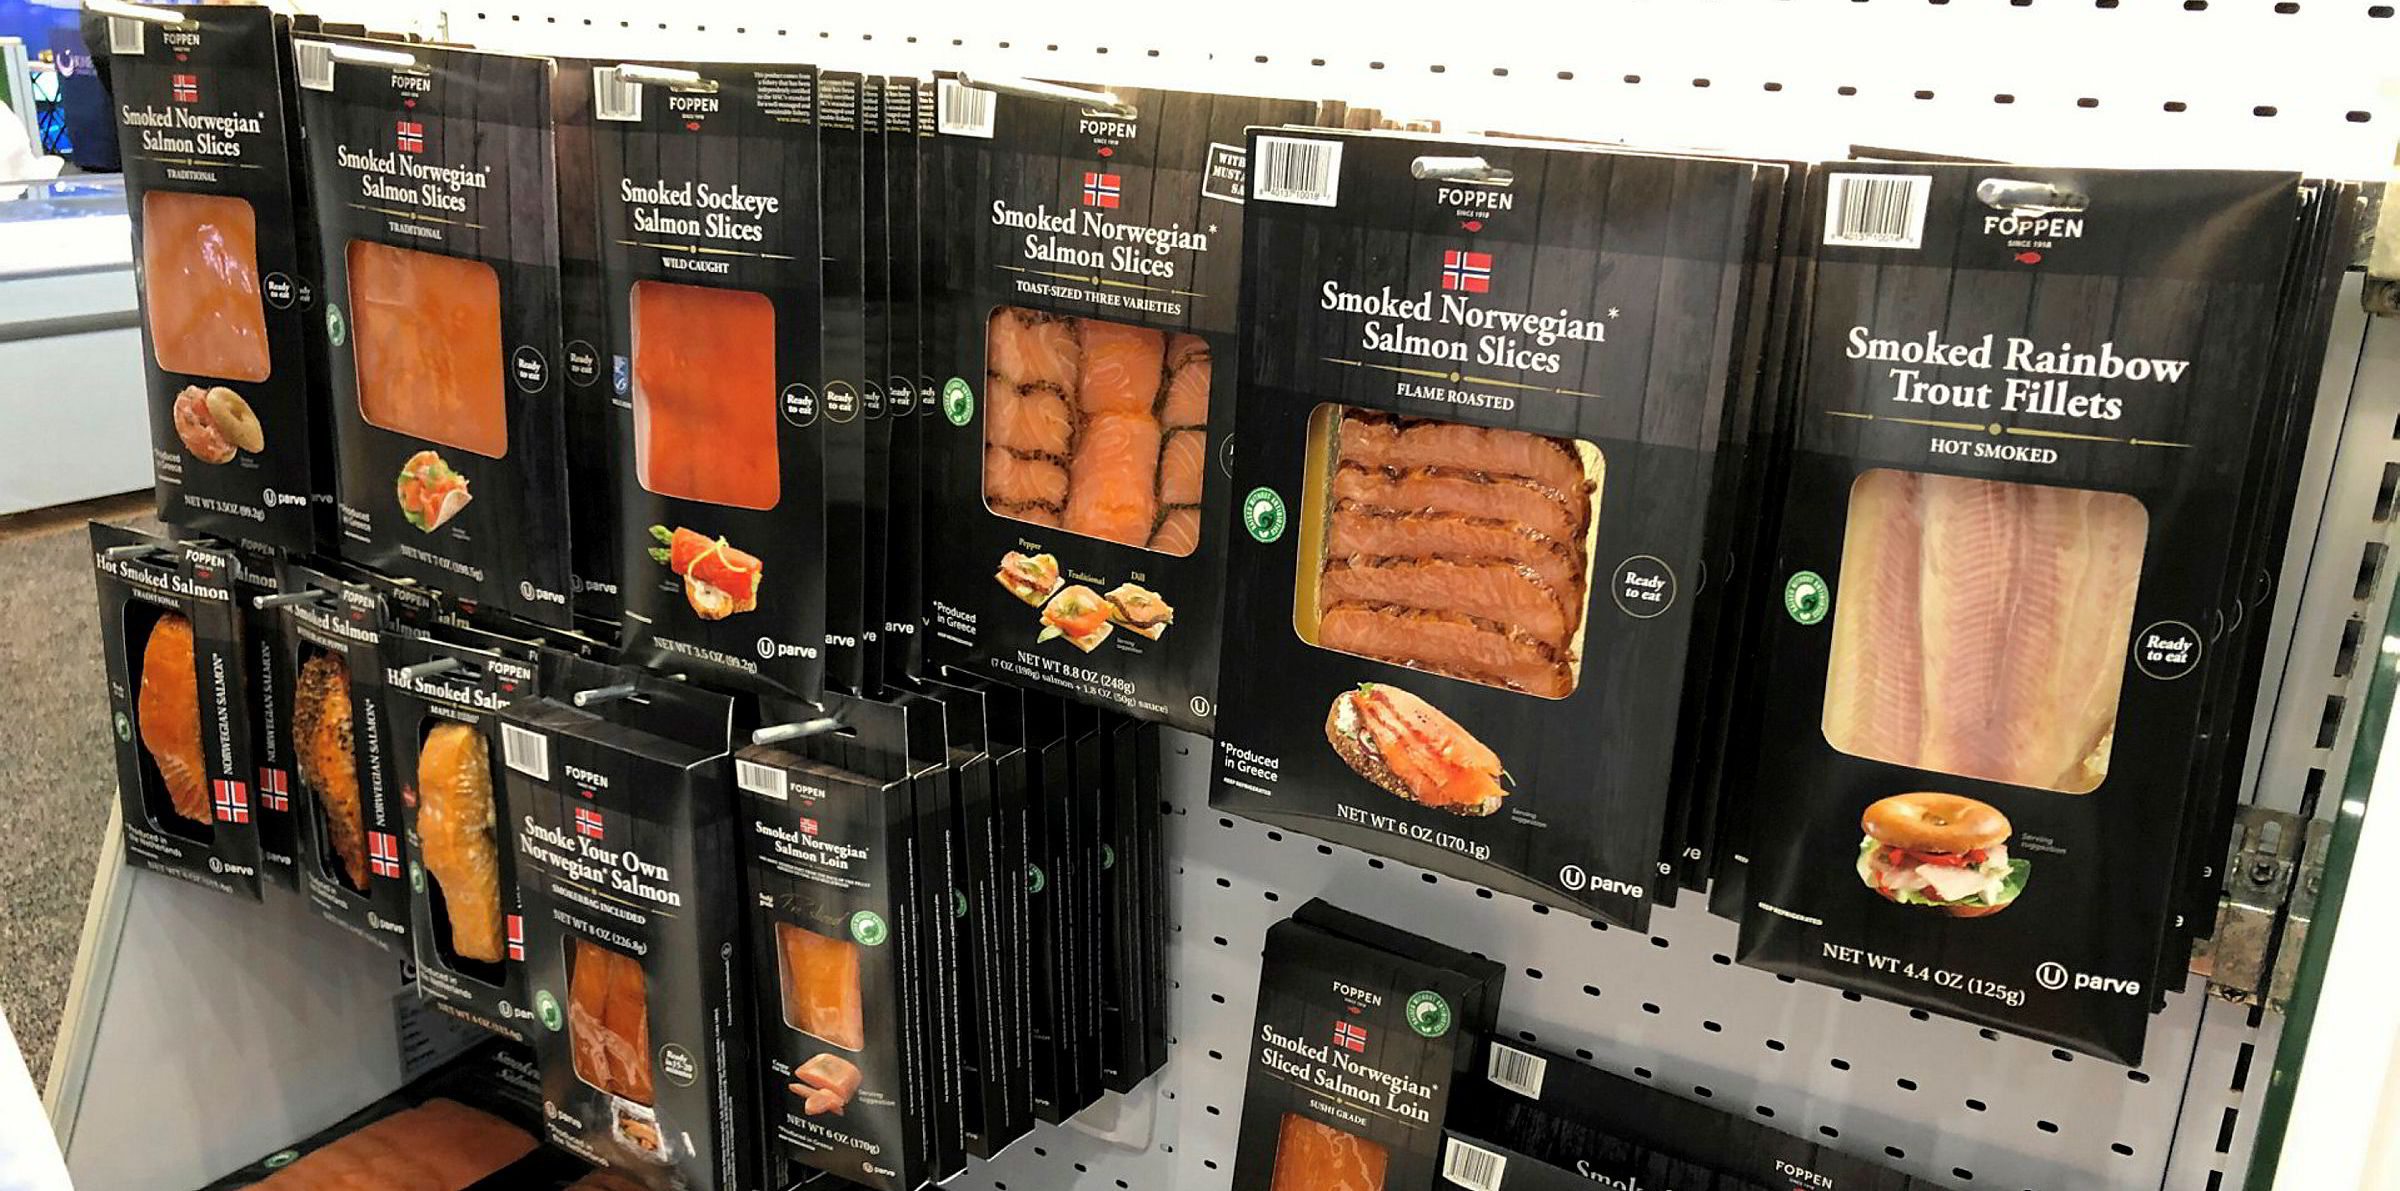 Foppen expanding smoked salmon brand in US market | IntraFish